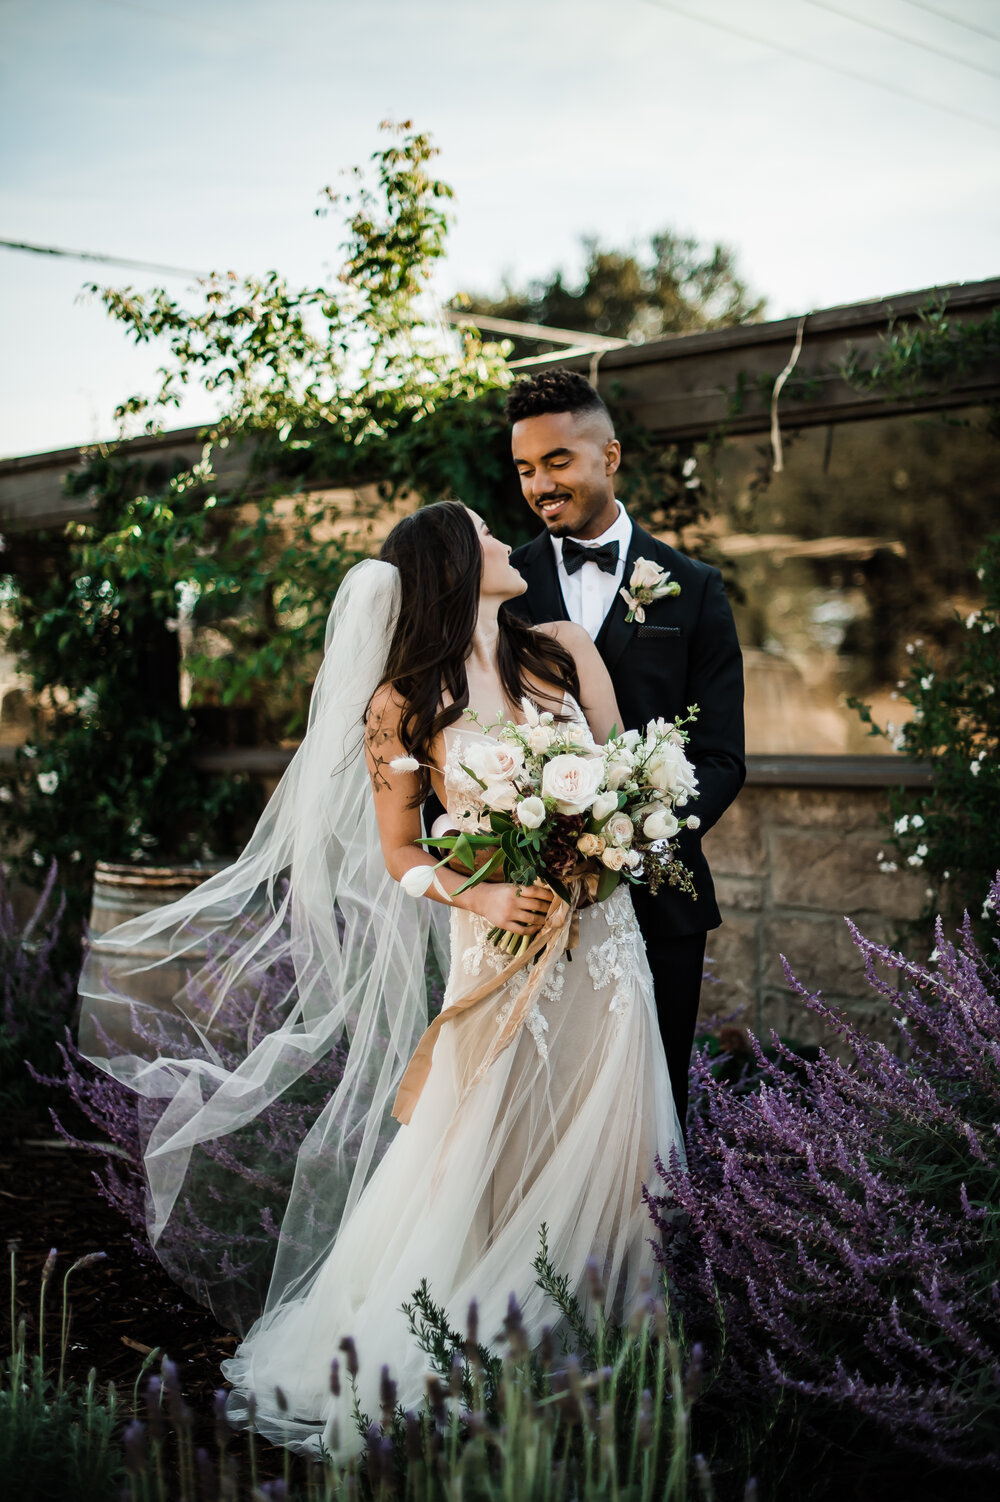 www.santabarbarawedding.com | The Tavern at Zaca Creek | Events by Fran | Michelle Ramirez Photography | Tangled Lotus | Friar Tux | Ever After Bridal | EmmaLinh | Model Bride and Groom 